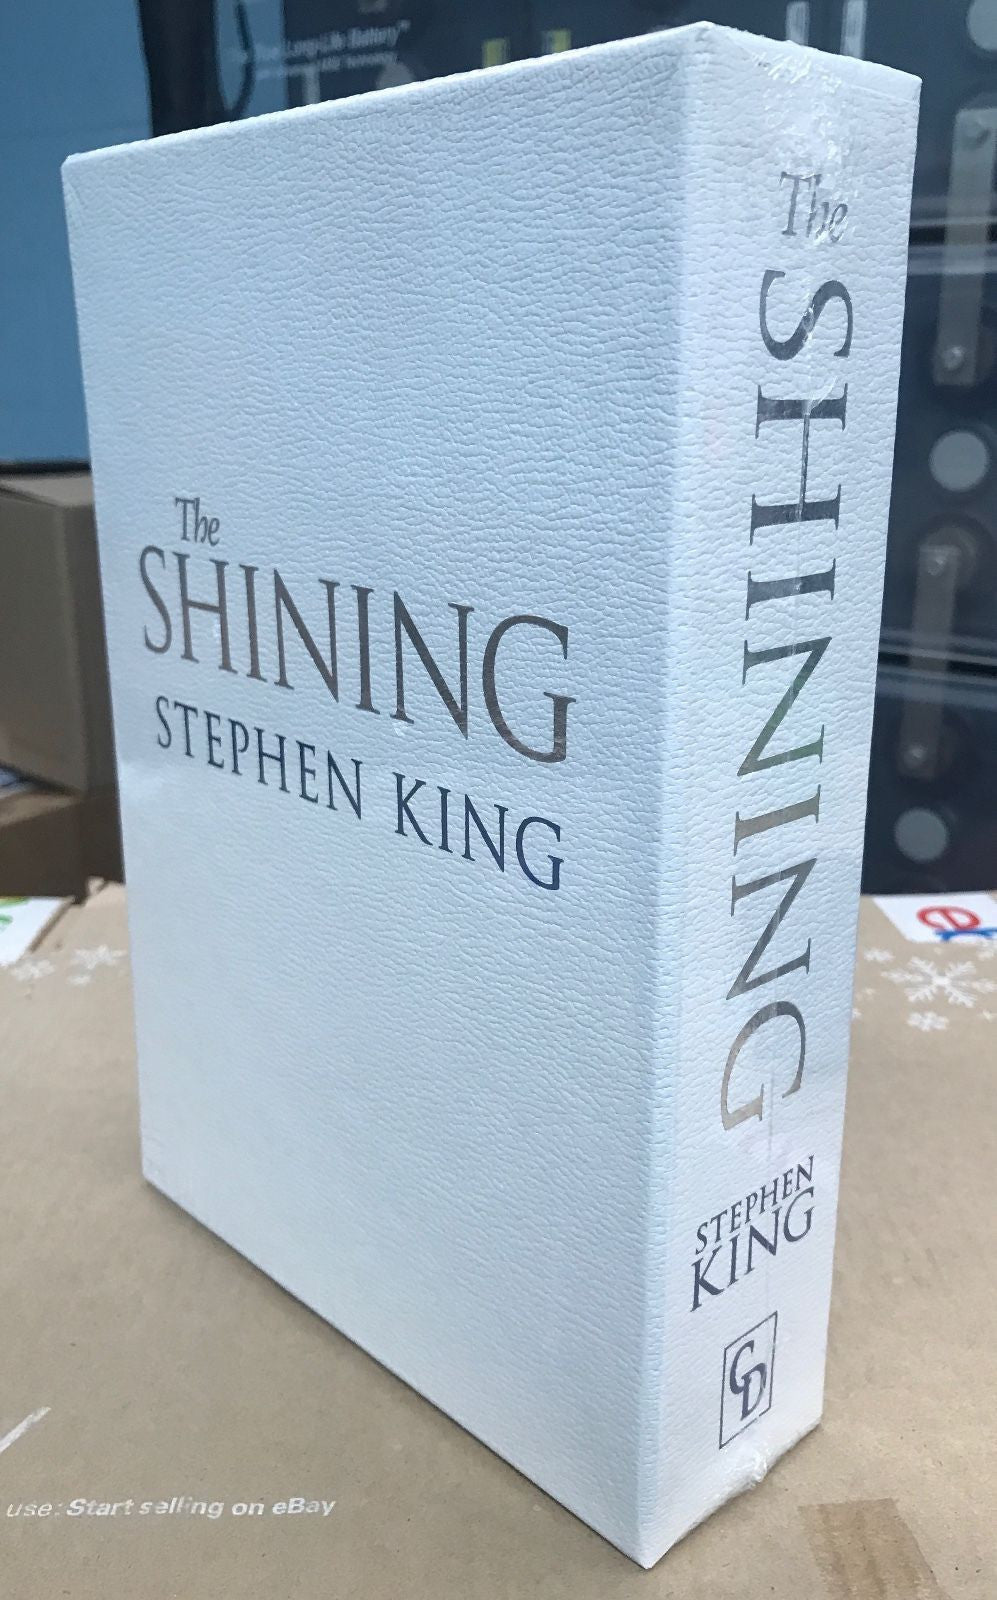 The Shining by Stephen King Deluxe Special Edition - 20 Copies Available Through Kickstarter Campaign